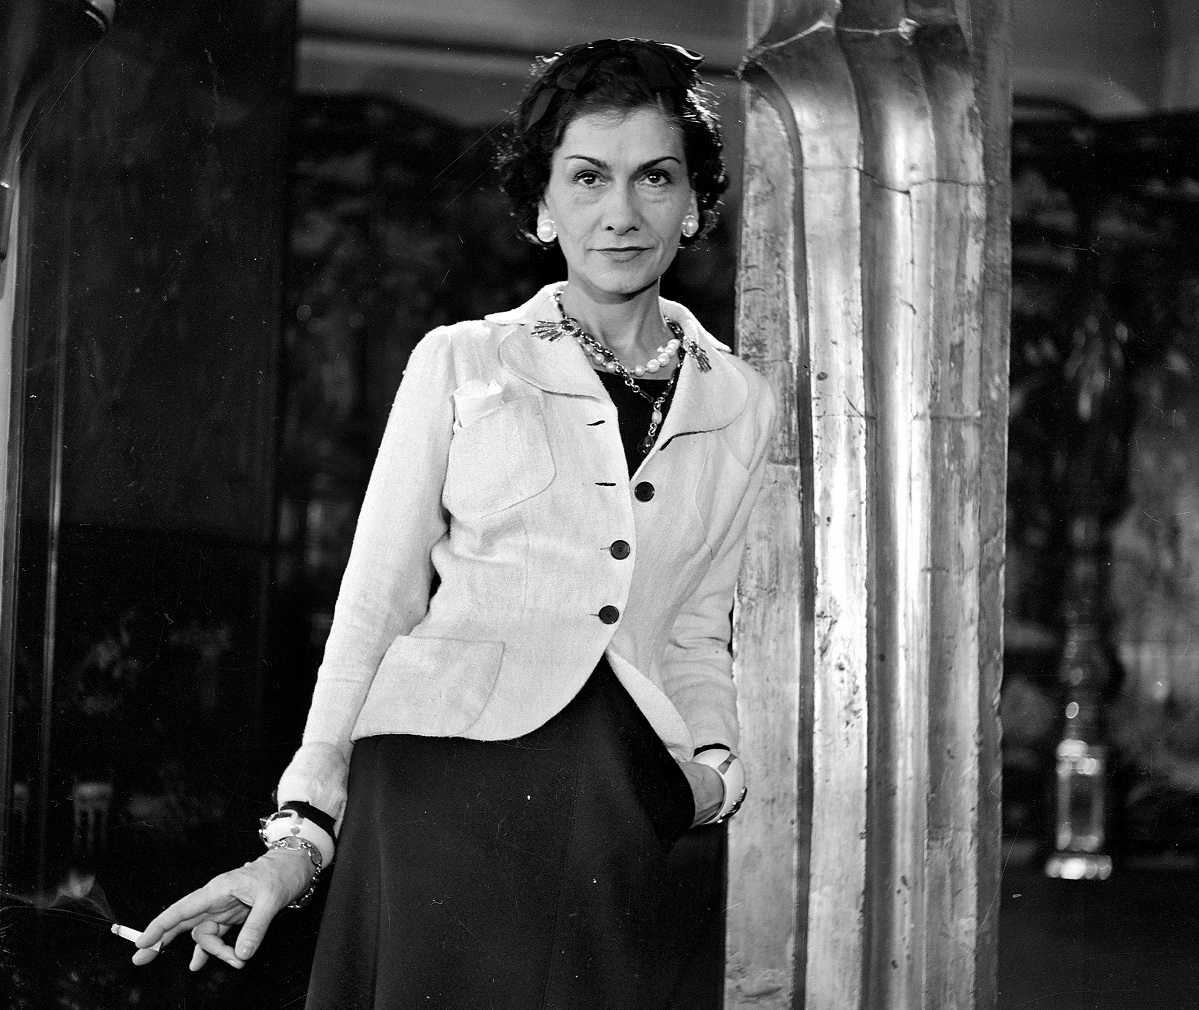 Coco Chanel, The Life and Times of an Icon - France Today